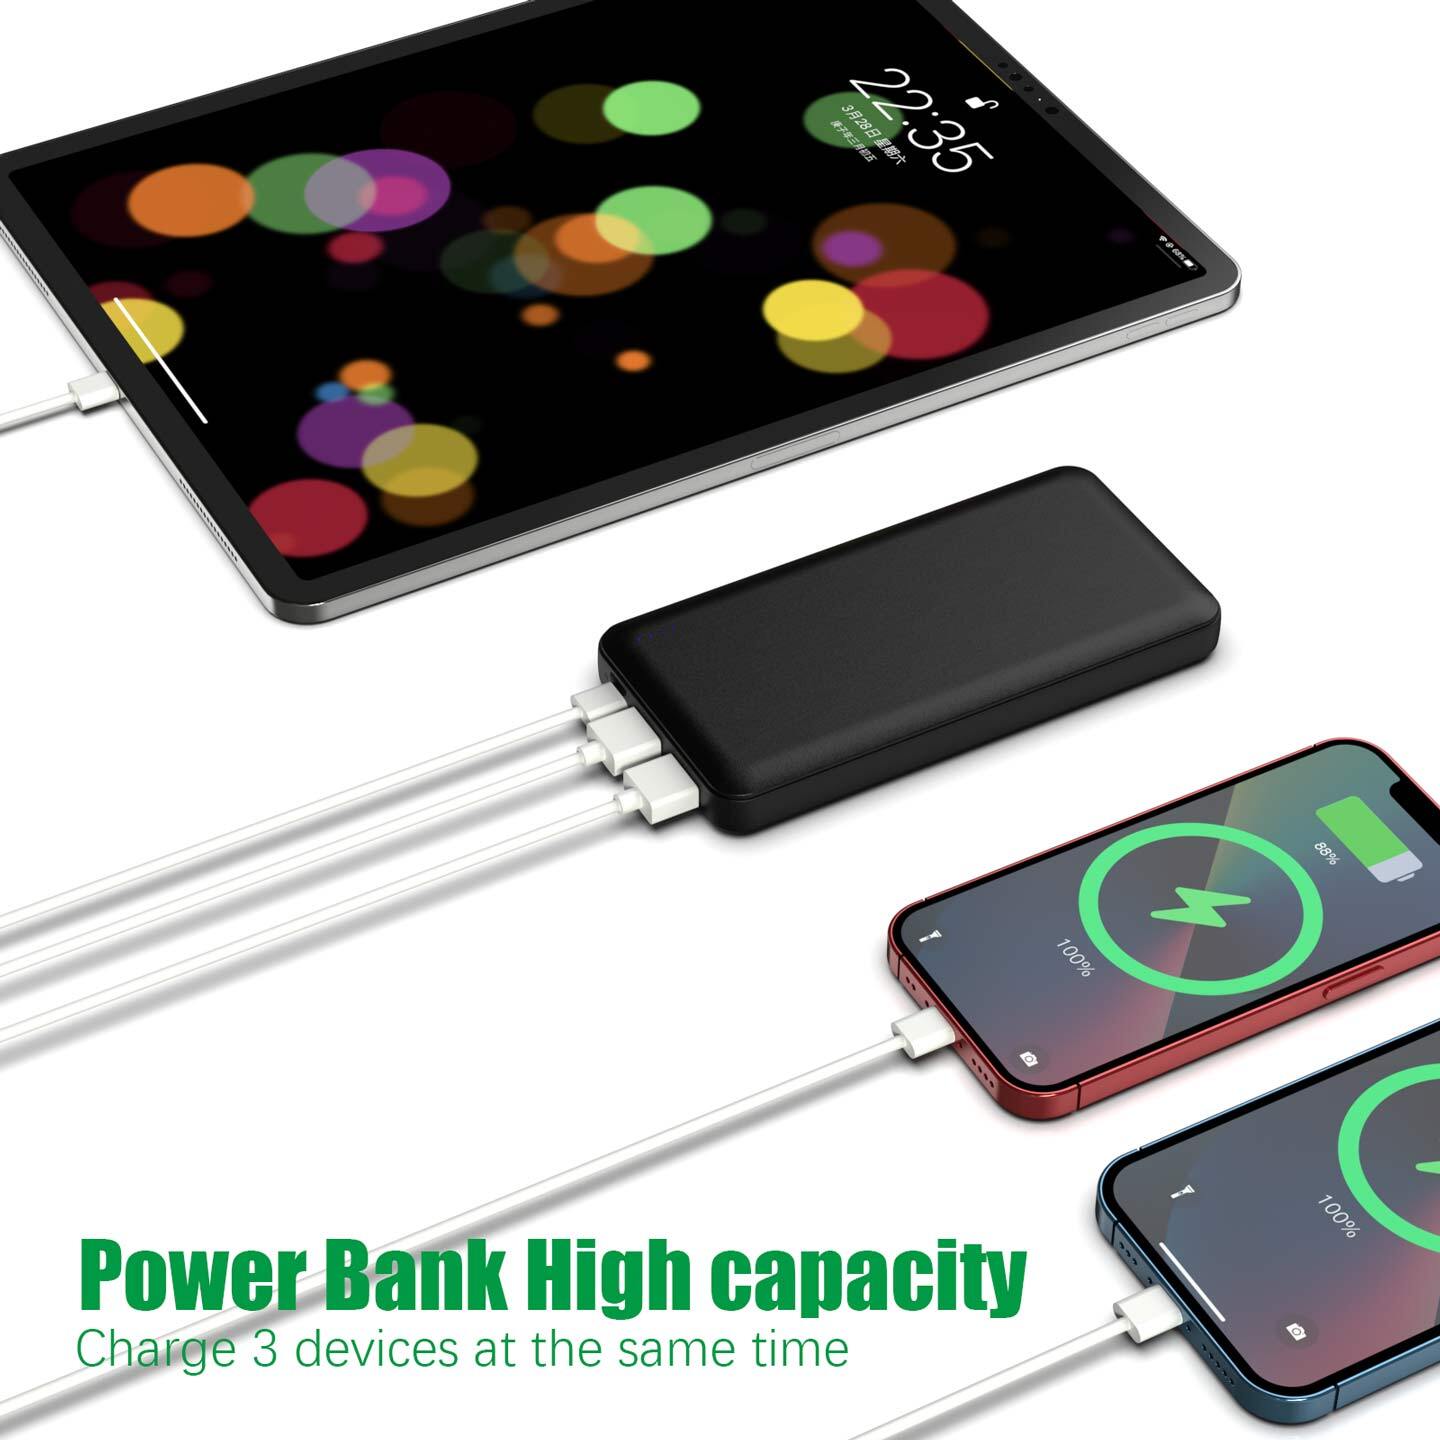 (United States) Metal Power bank portable charger 10000mAh external battery pack charger smart phone tablet speaker DV etc.